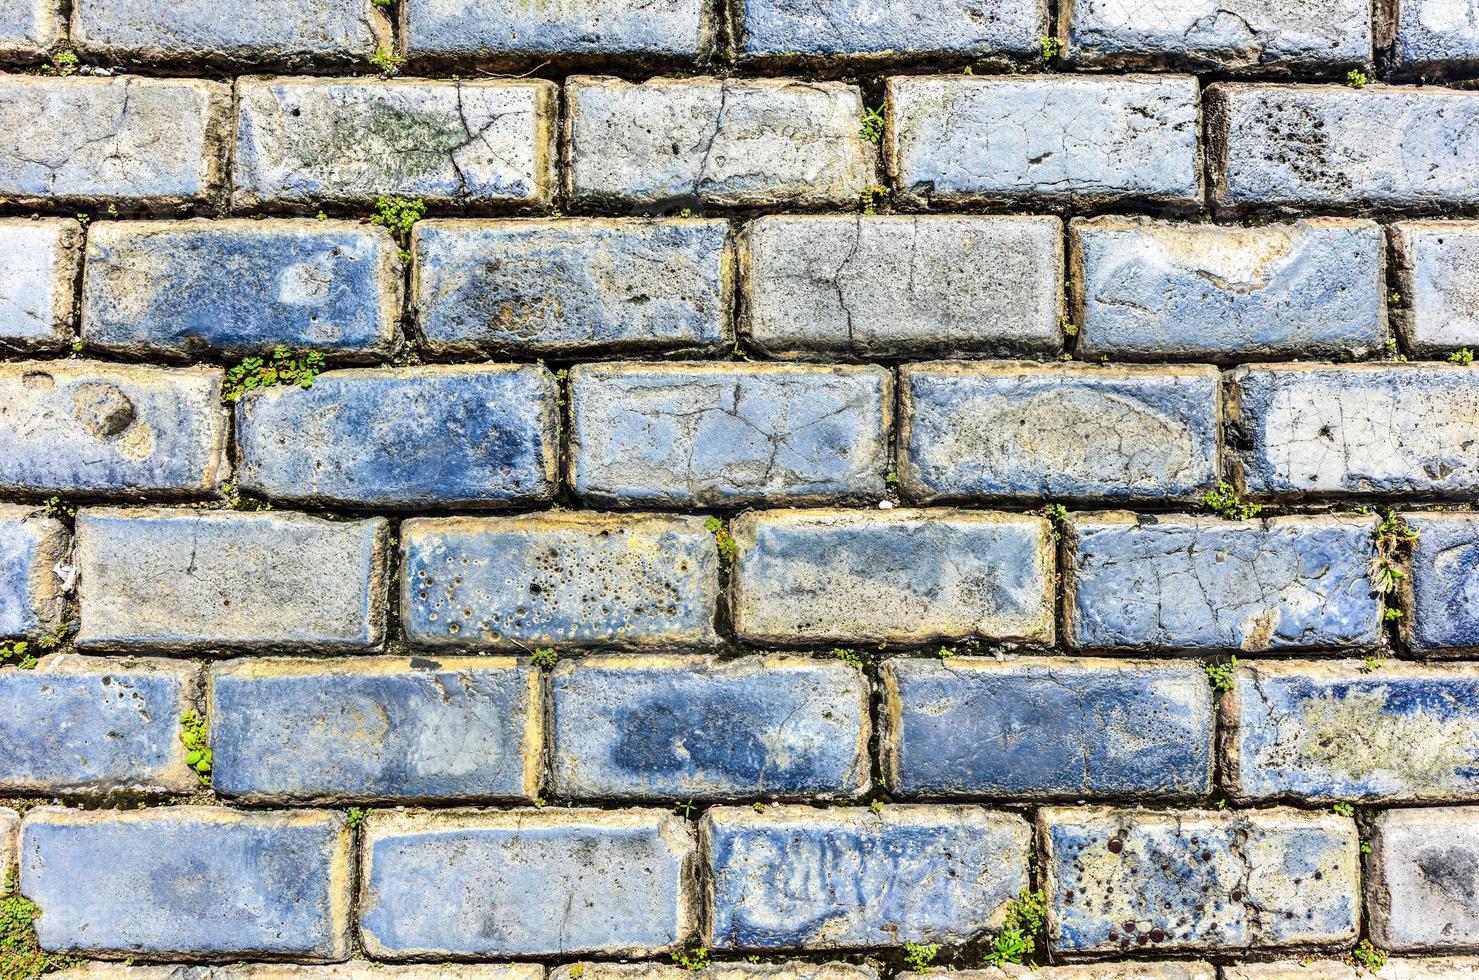 Blue cobblestone paved street in Old San Juan, Puerto Rico. They were brought as ballast in the bottoms of European merchant ships in the 1700s. photo